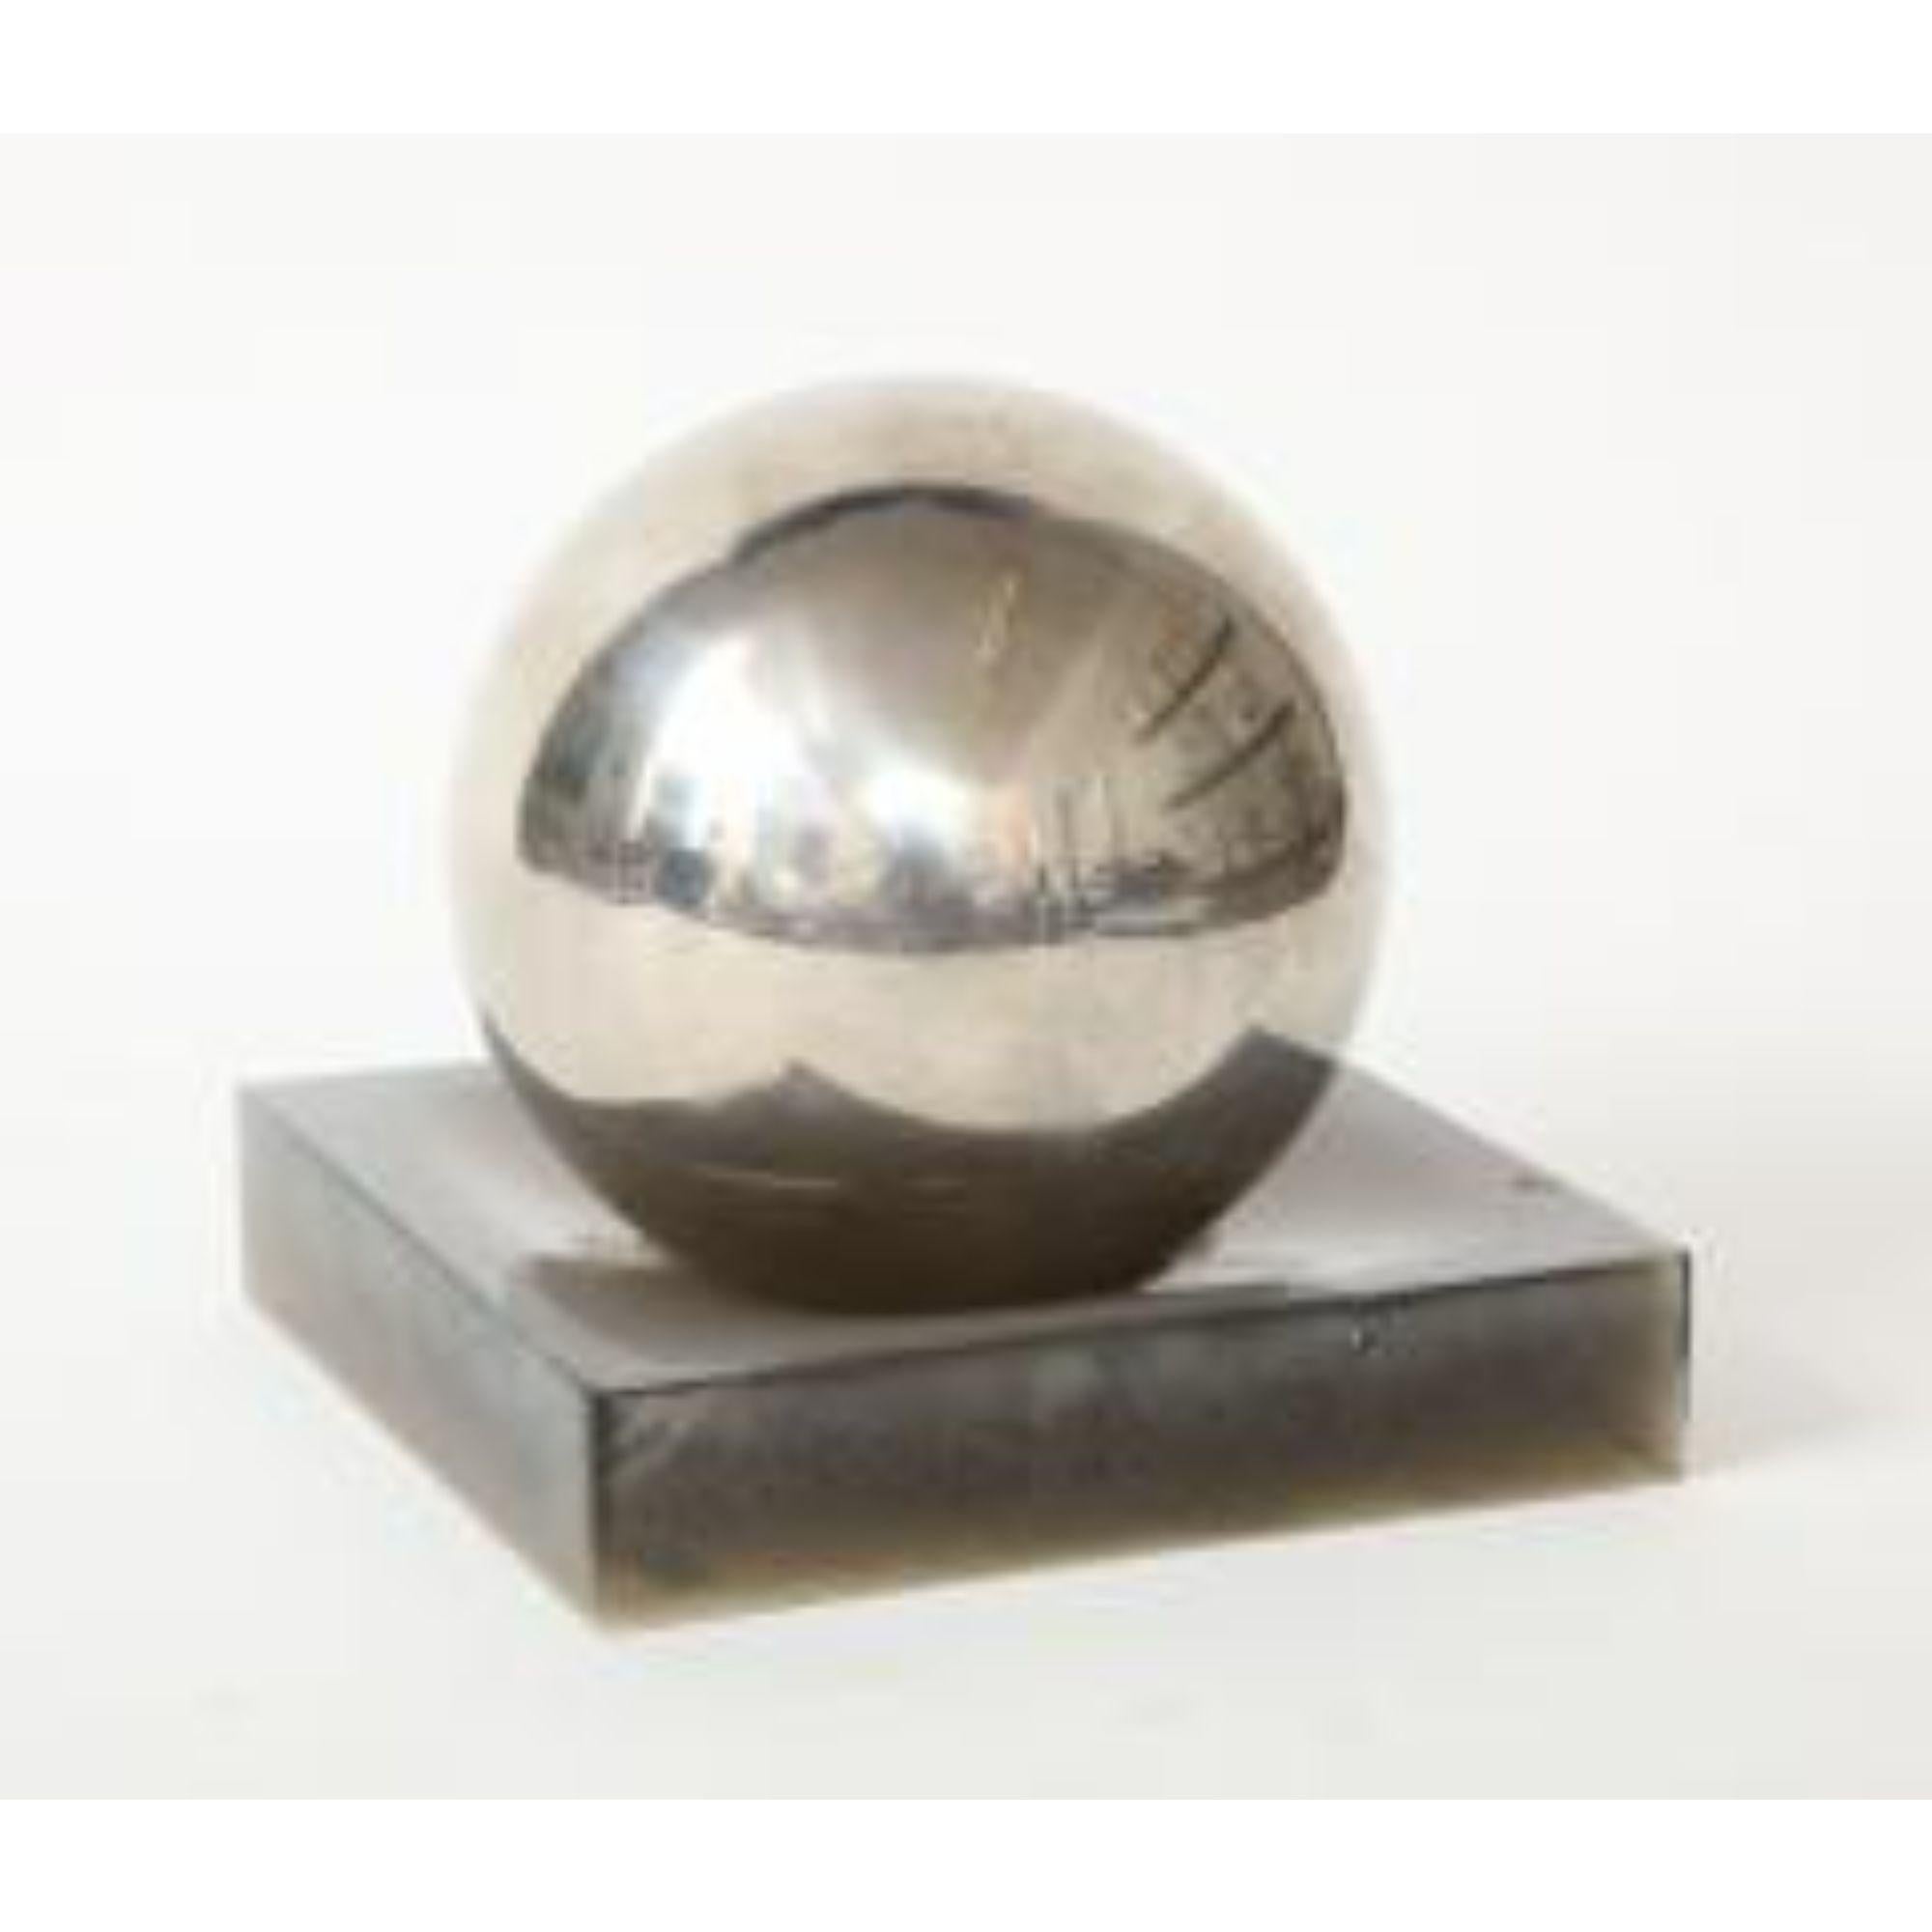 Silver Ball on Lucite Base

Round silver ball sits on a square Lucite base finished in a dark smoked grey.
Modernist in composition, this pair makes for a sleek and highly sculptural decorative object.